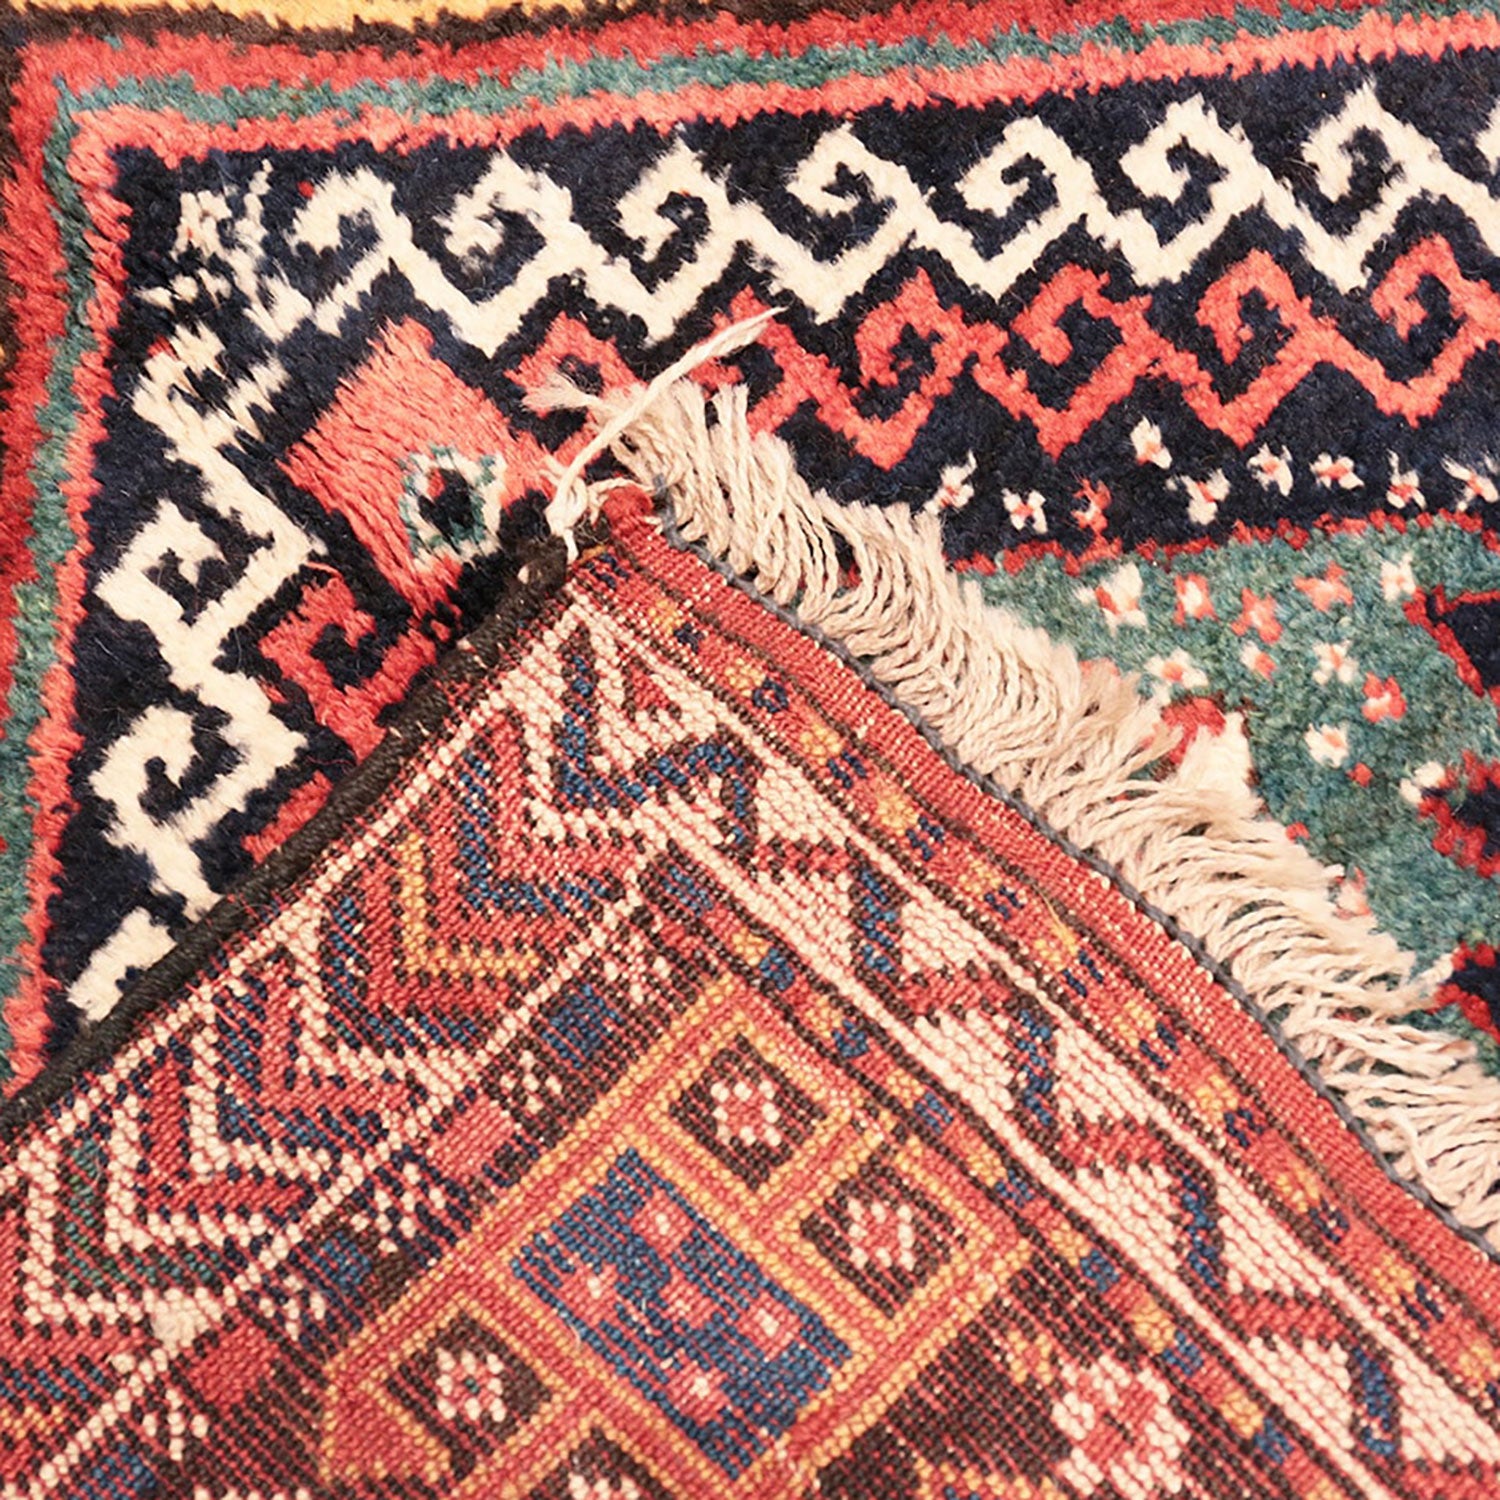 Close-up of handwoven carpet with intricate patterns and rich colors.